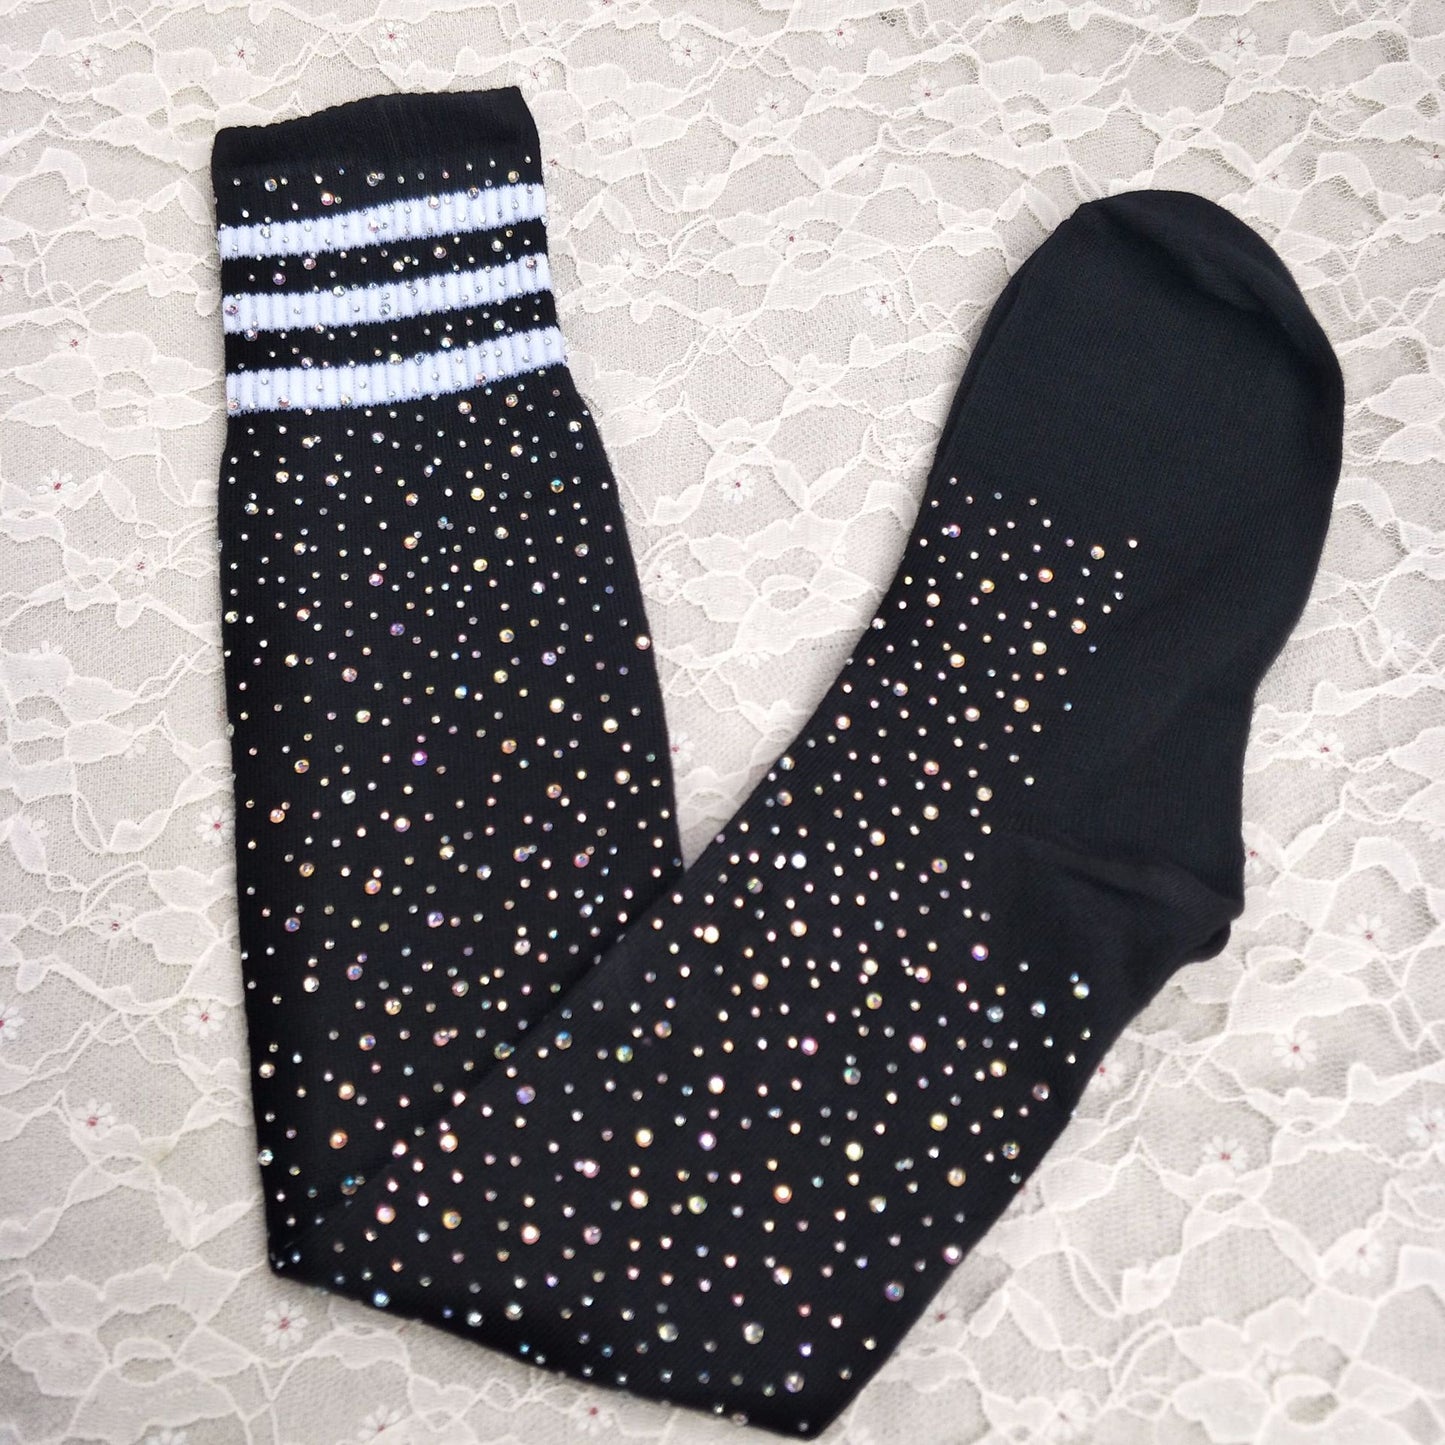 Sequins Stockings